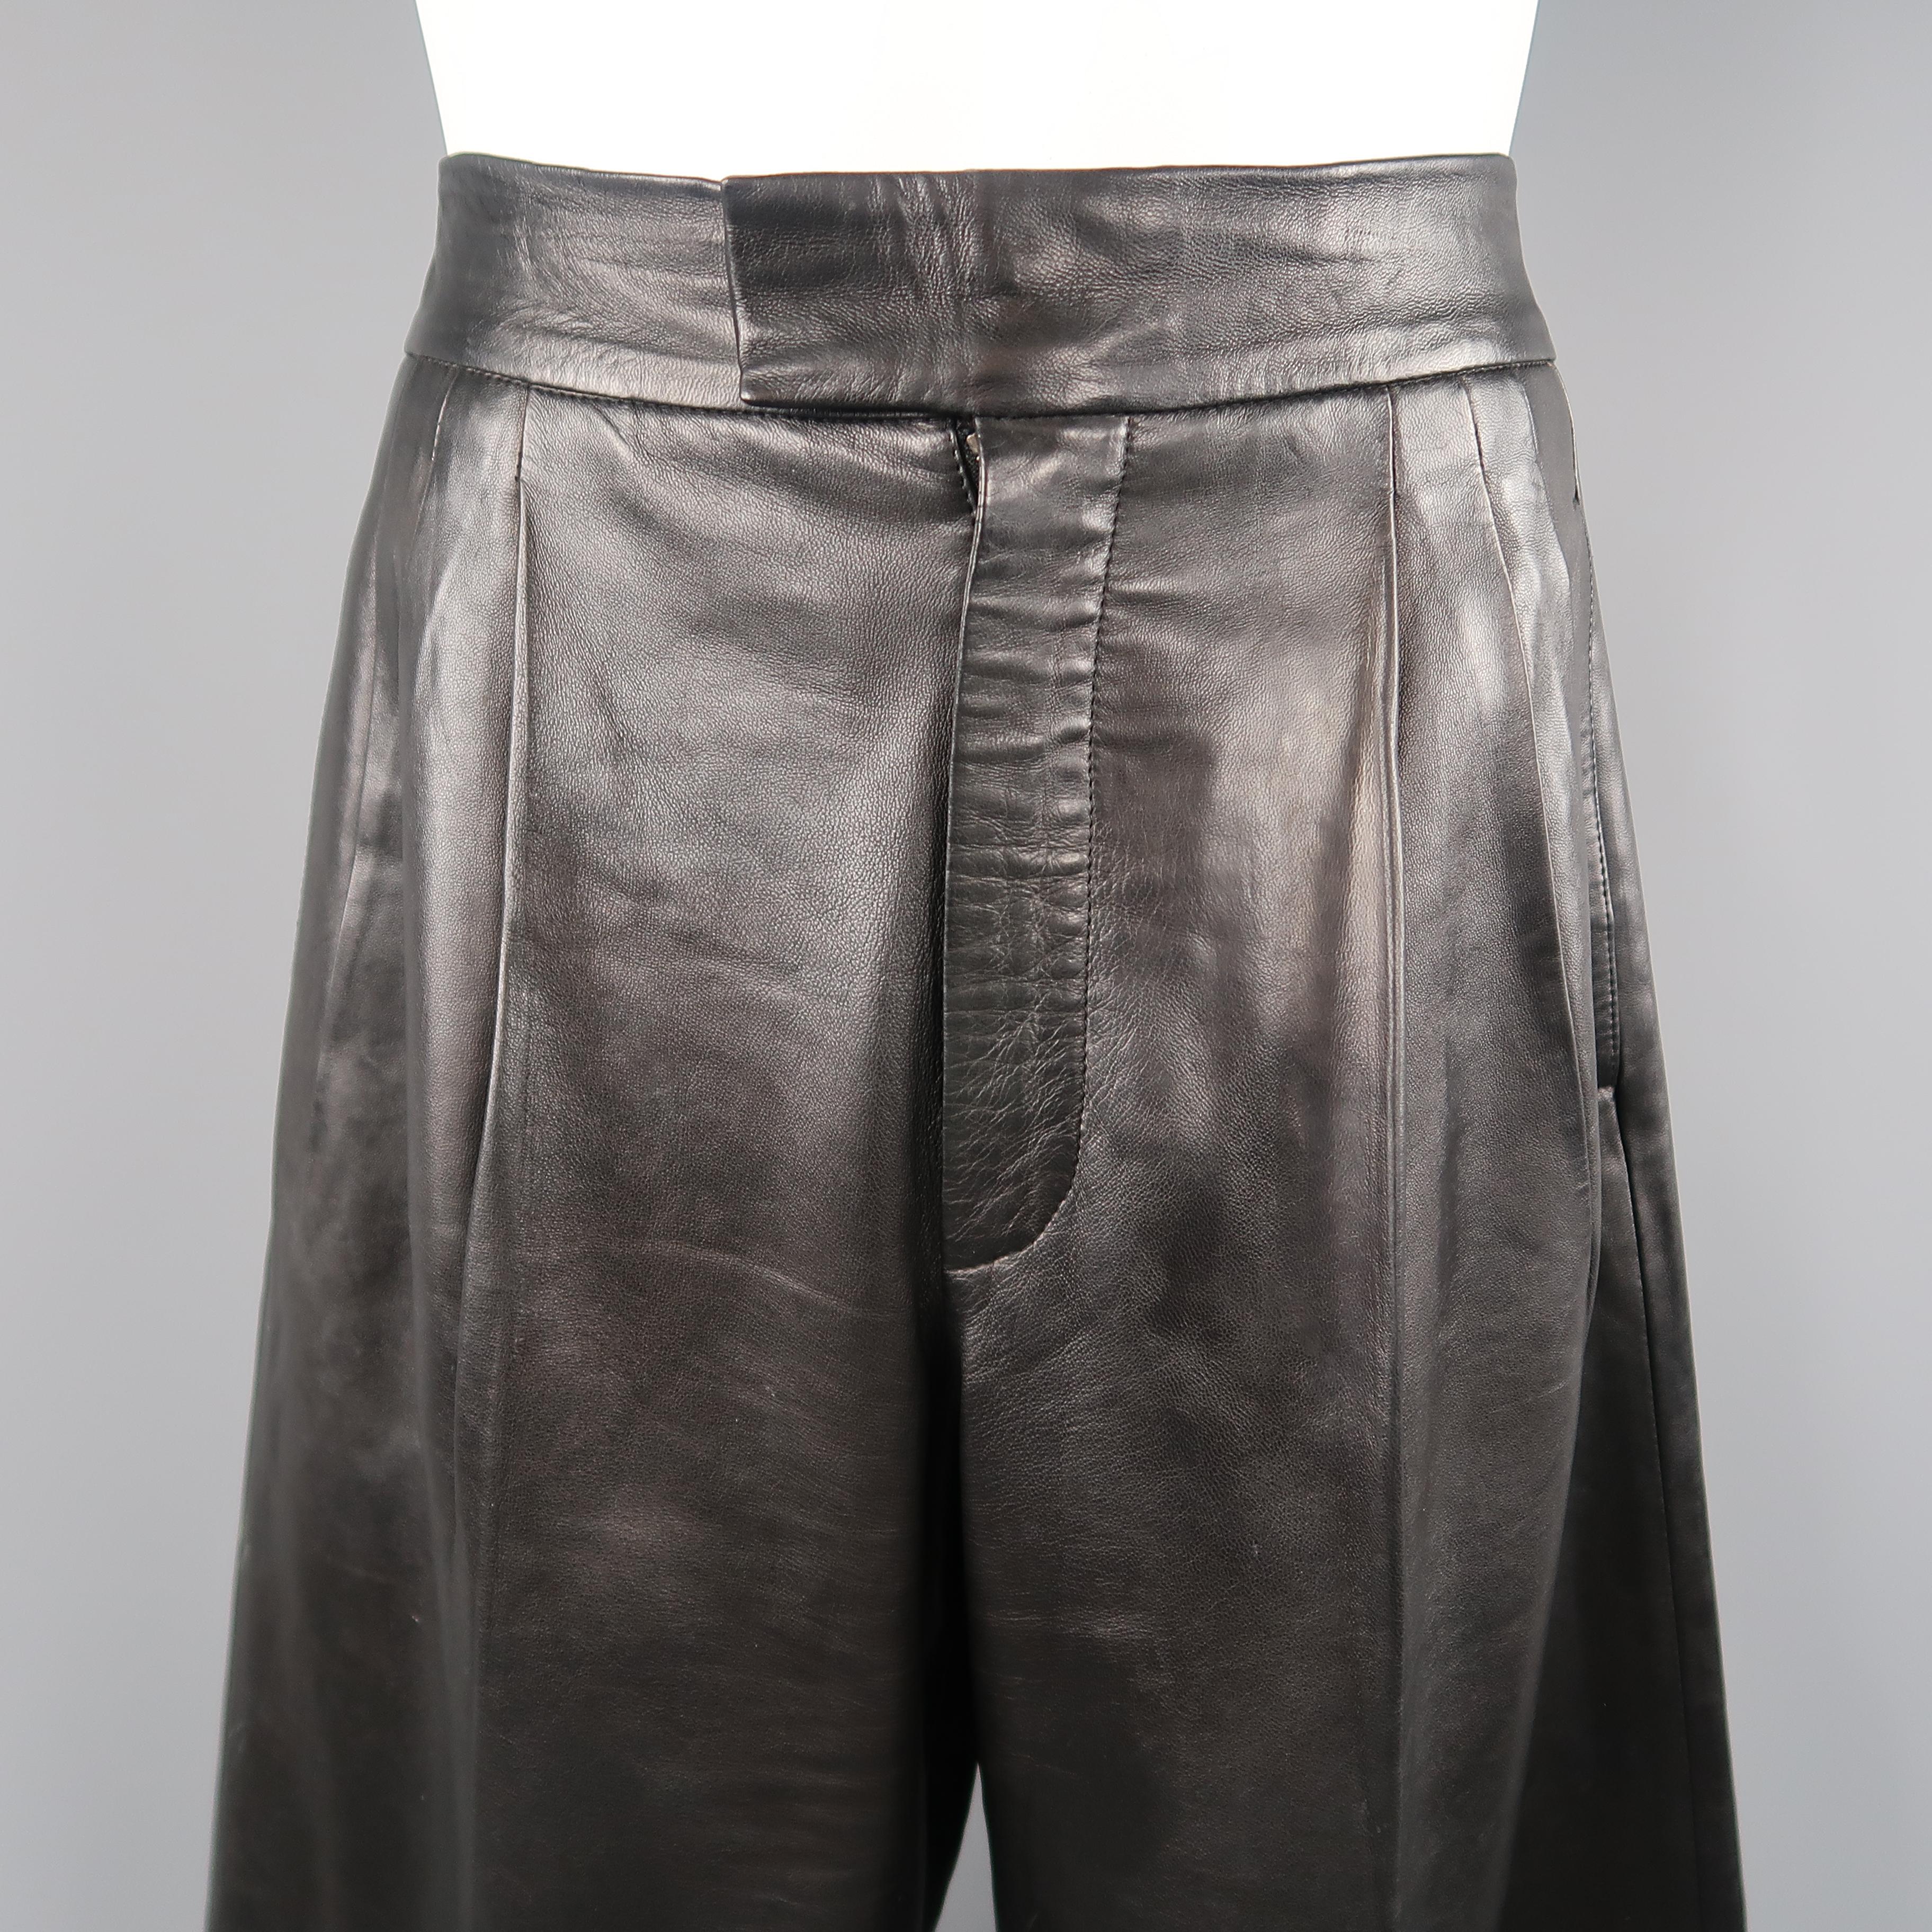 GUCCI by TOM FORD Spring Summer  2001 Collection pants come in smooth black leather and feature a tab closure waistband, zip fly, and wide leg with triple pleat. Wear throughout leather. As-is. Made in Italy.
 
Good Pre-Owned Condition.
Marked: IT